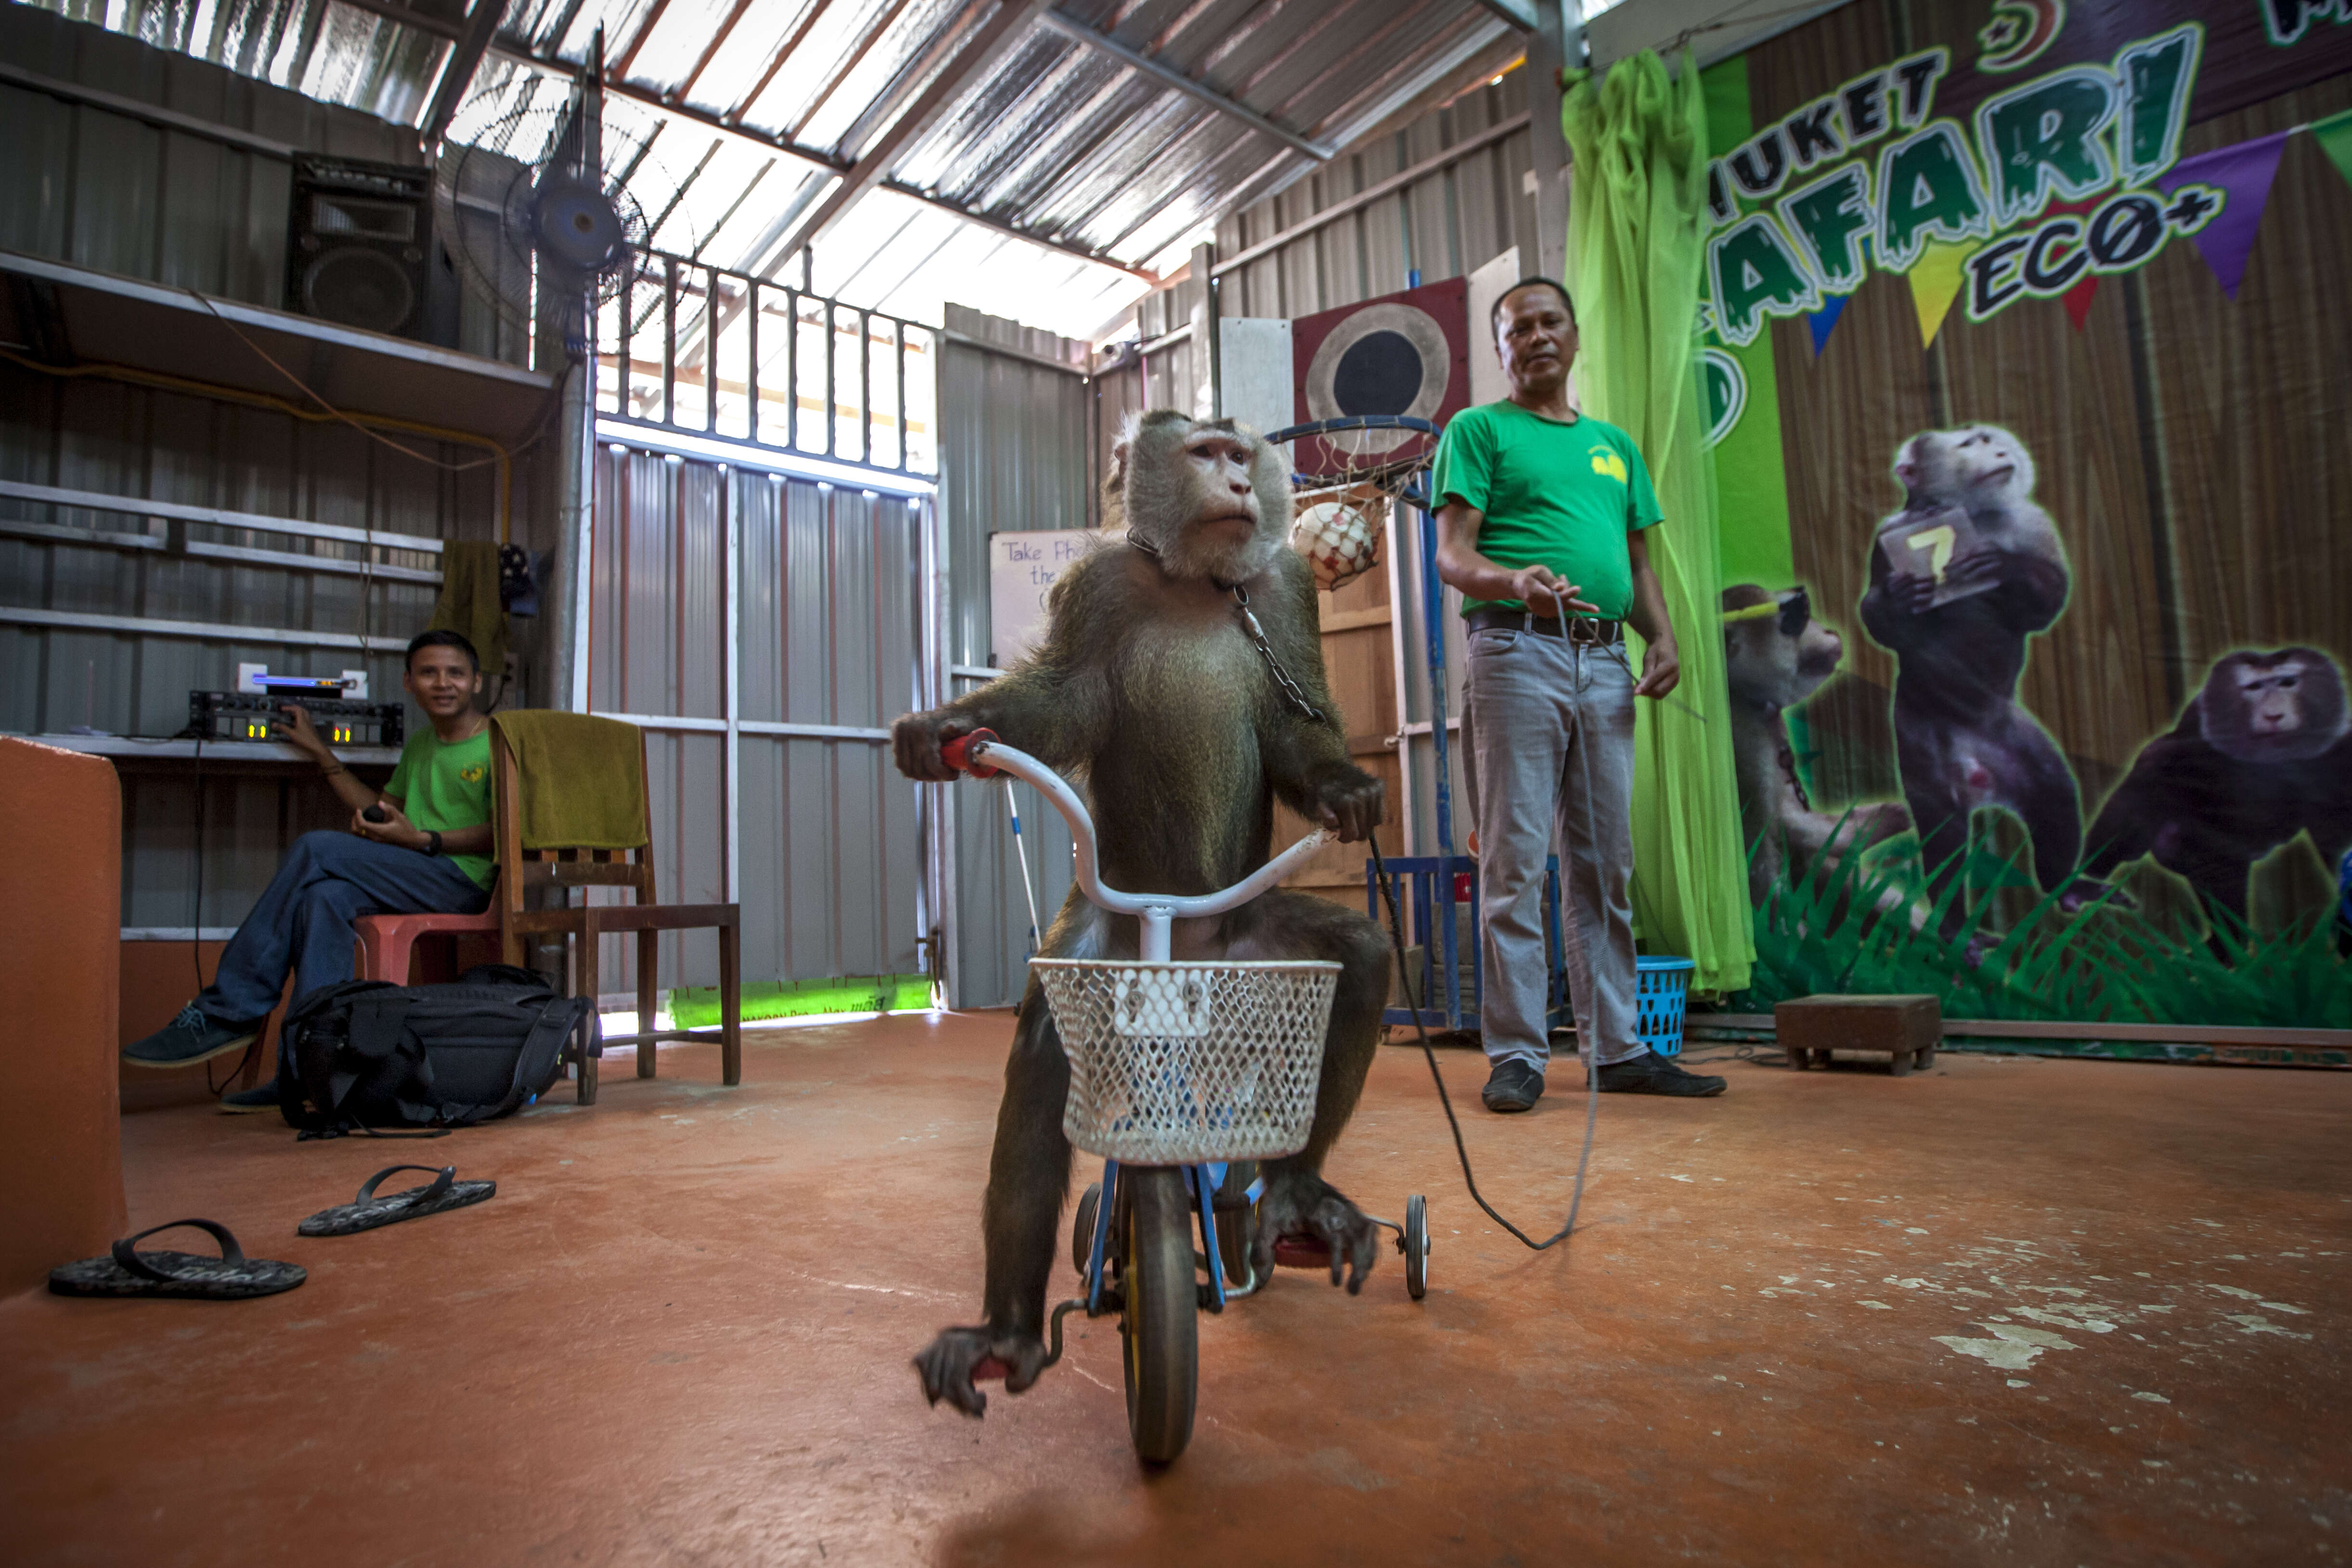 Macaque monkey forced to ride bike at Thailand safari park